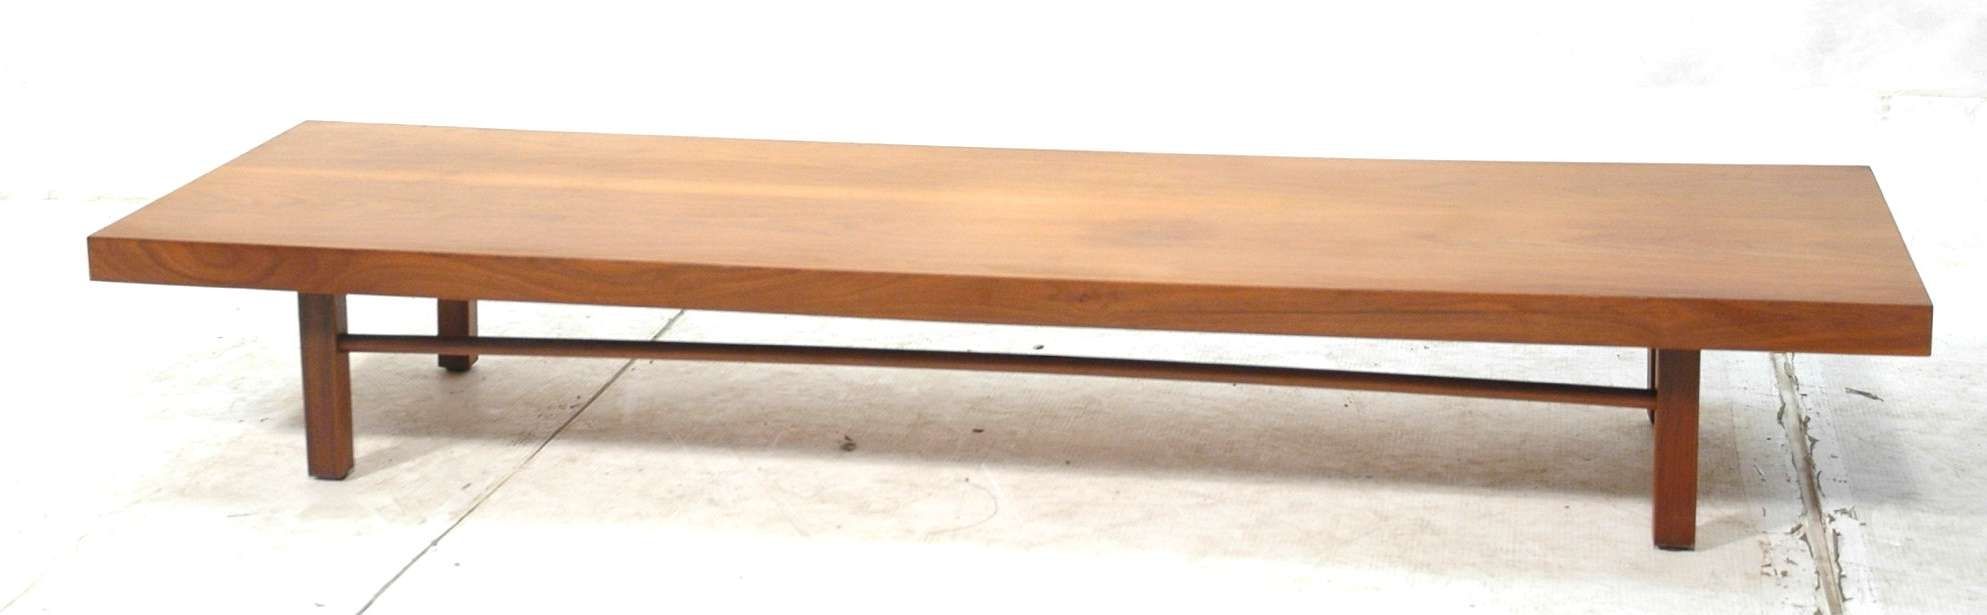 Most Recently Released Very Low Coffee Tables Within Very Low Coffee Table / Coffee Tables / Thippo (View 1 of 20)